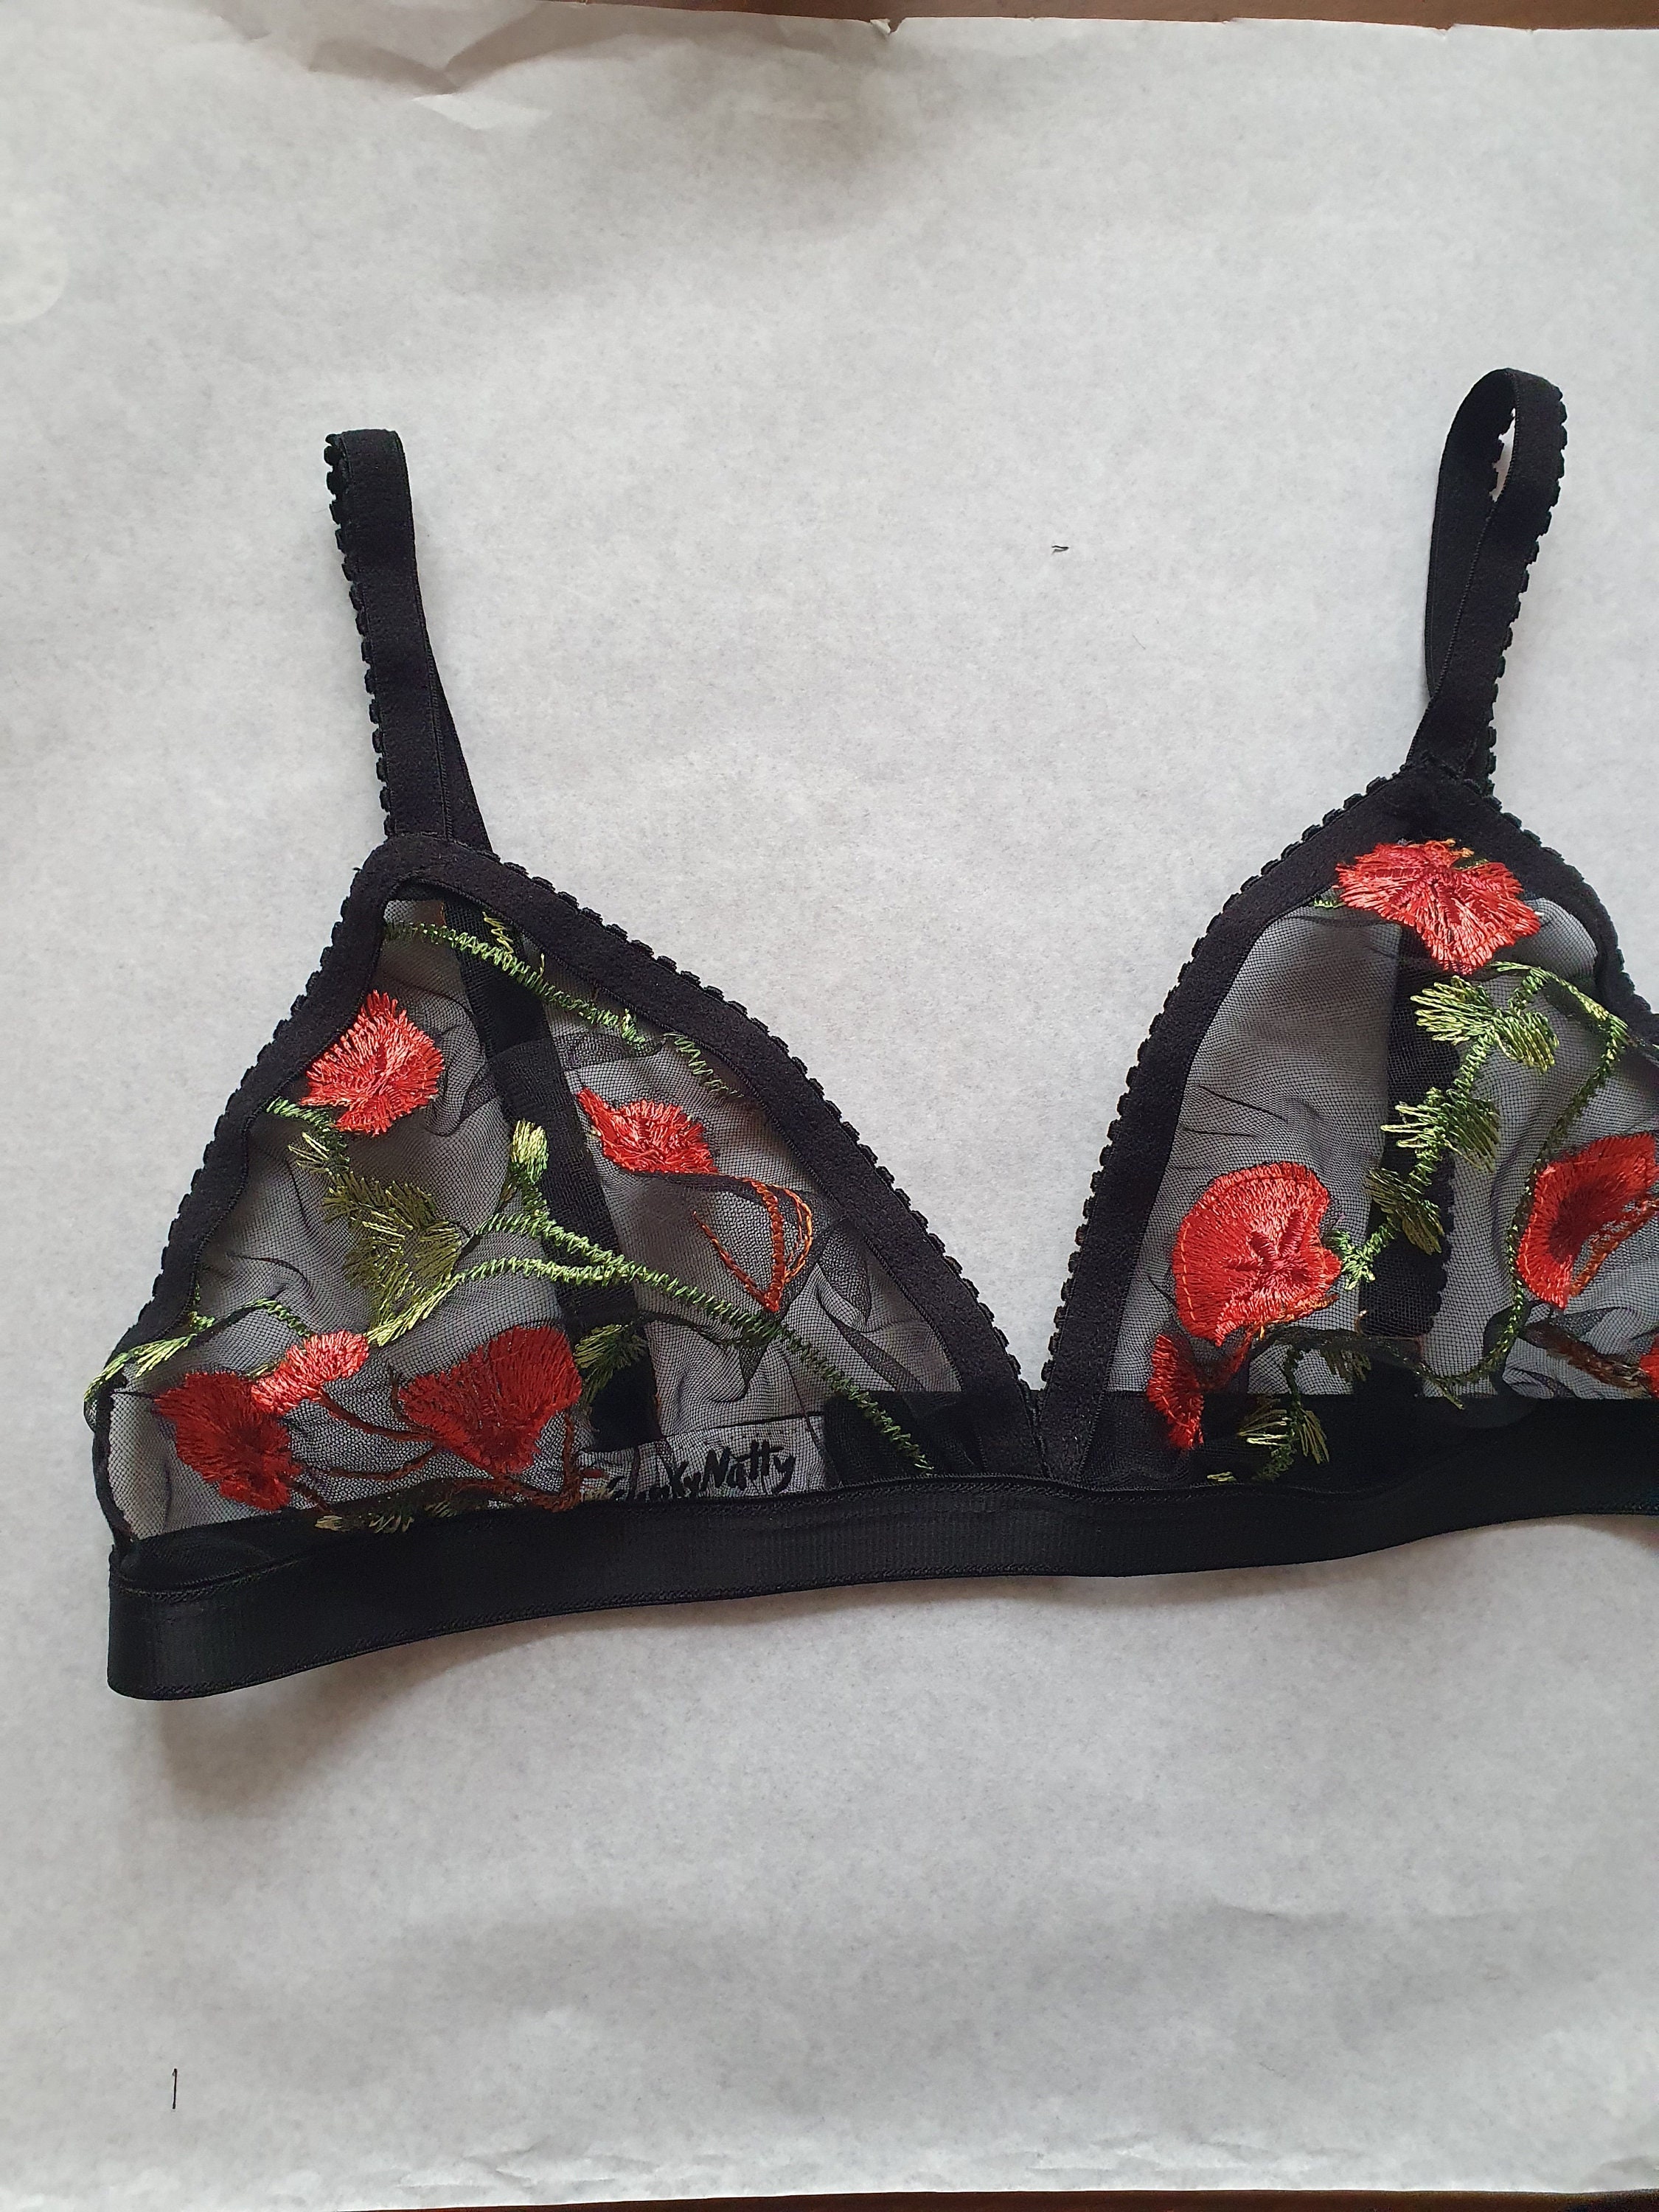 Transparent Mesh Bra, Sheer Lingerie, Floral Bralette, Embroidery Red  Flowers, Botanical See Through, Wireless Bra -  Canada